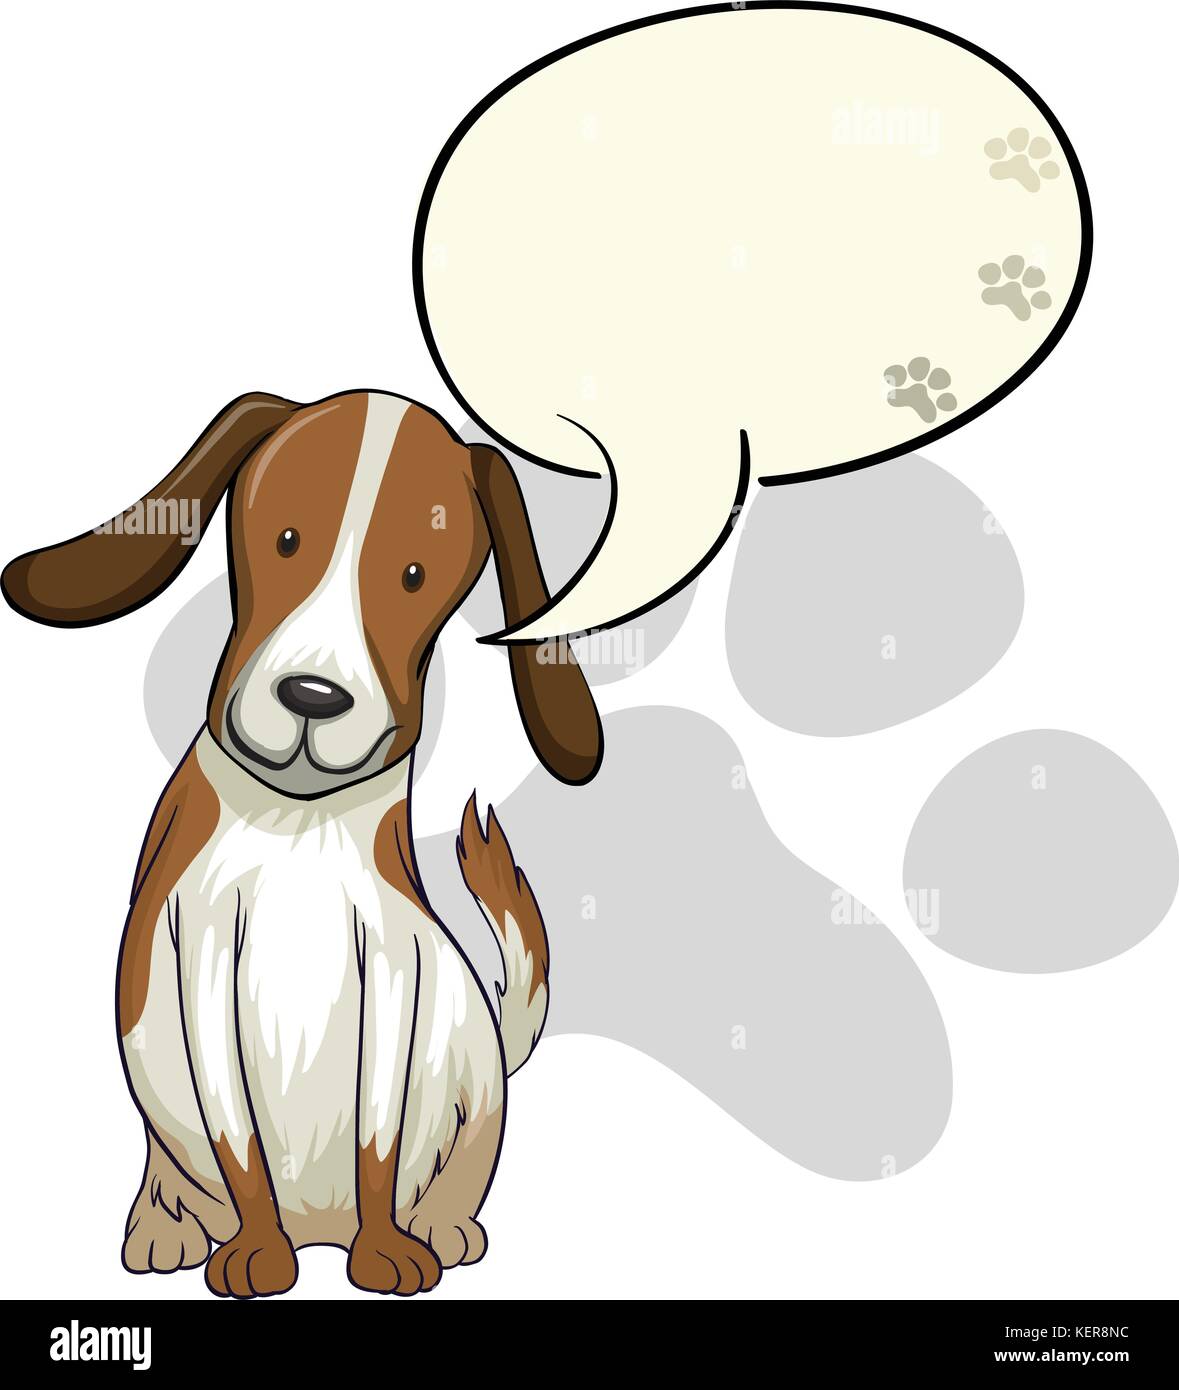 Illustration of a dog thinking on a white background Stock Vector